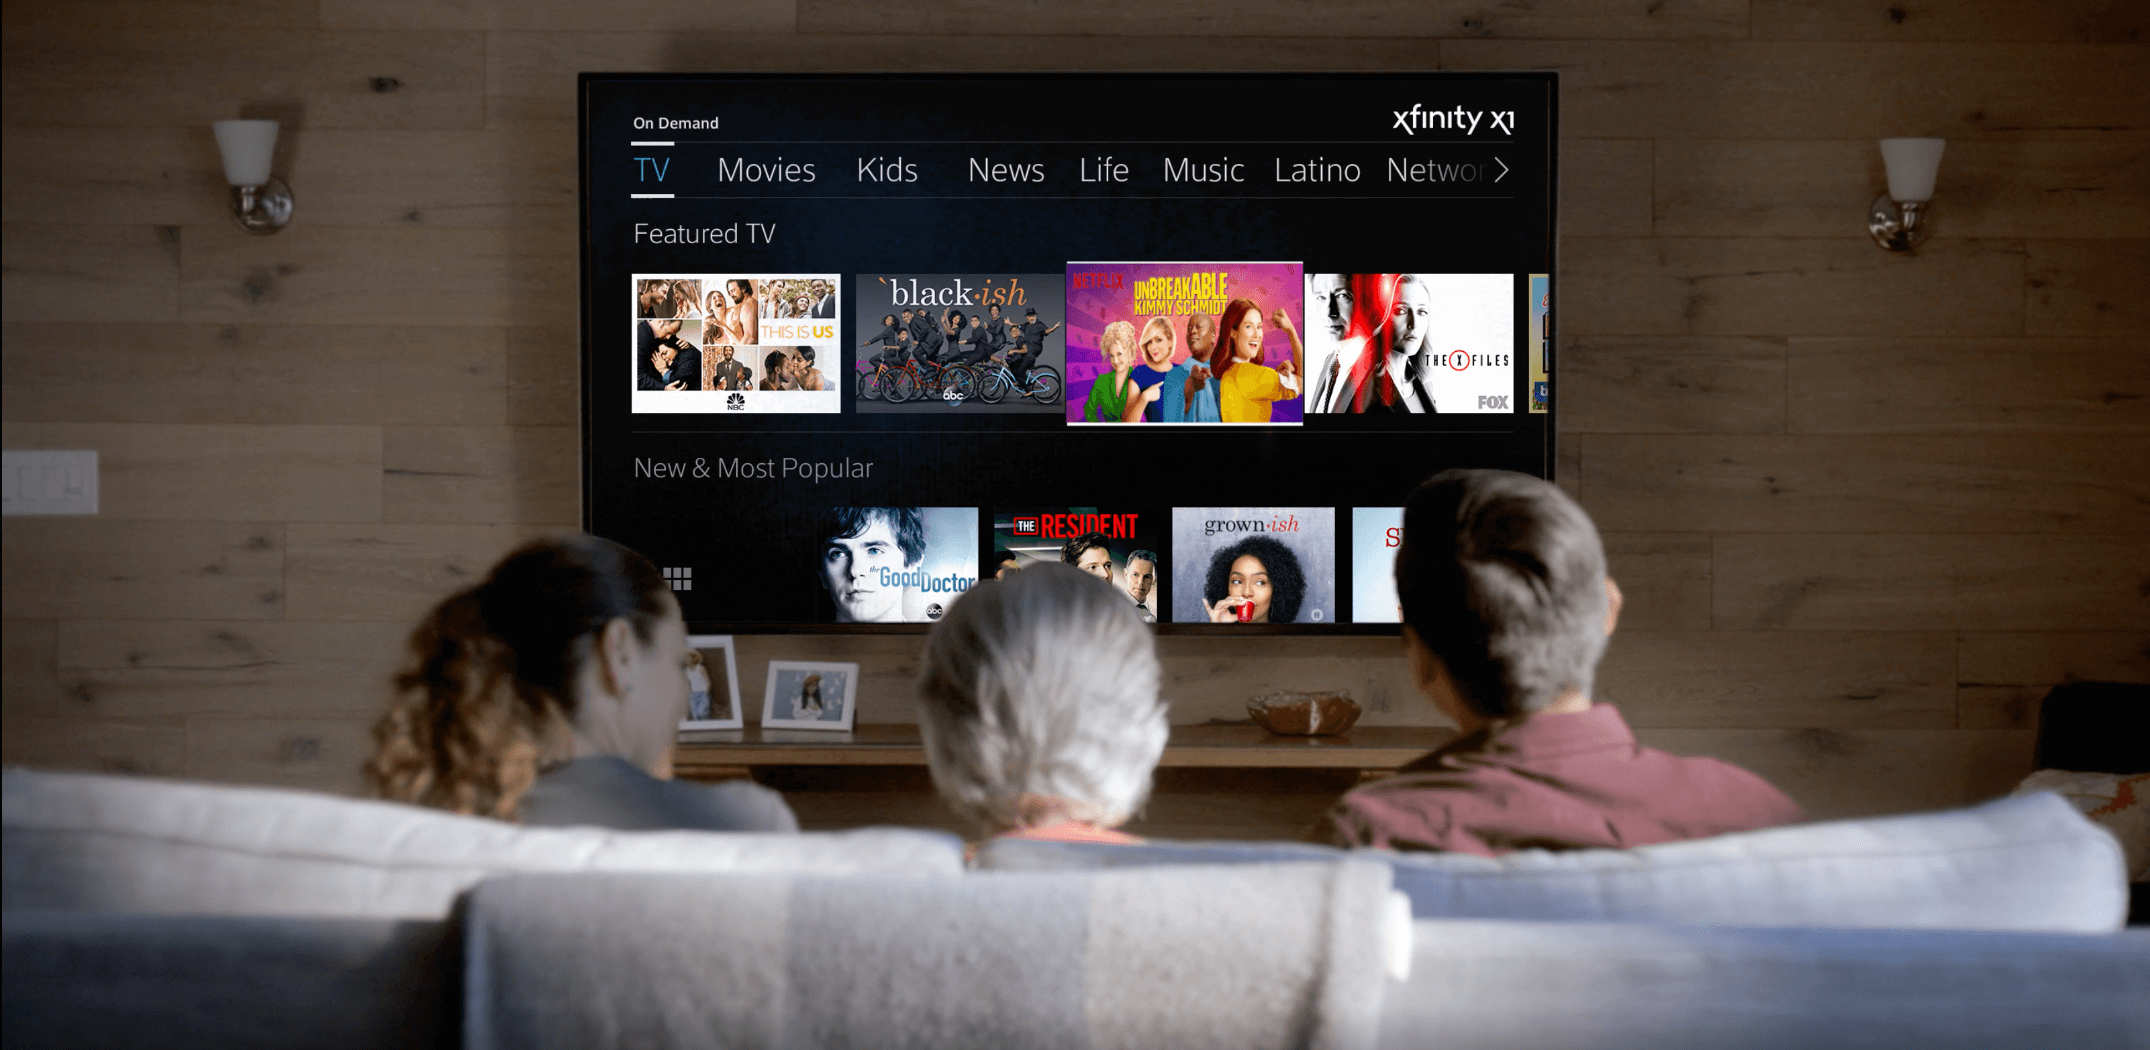 Do I Need A DVR? — Probably, But Read More to Find Out Why